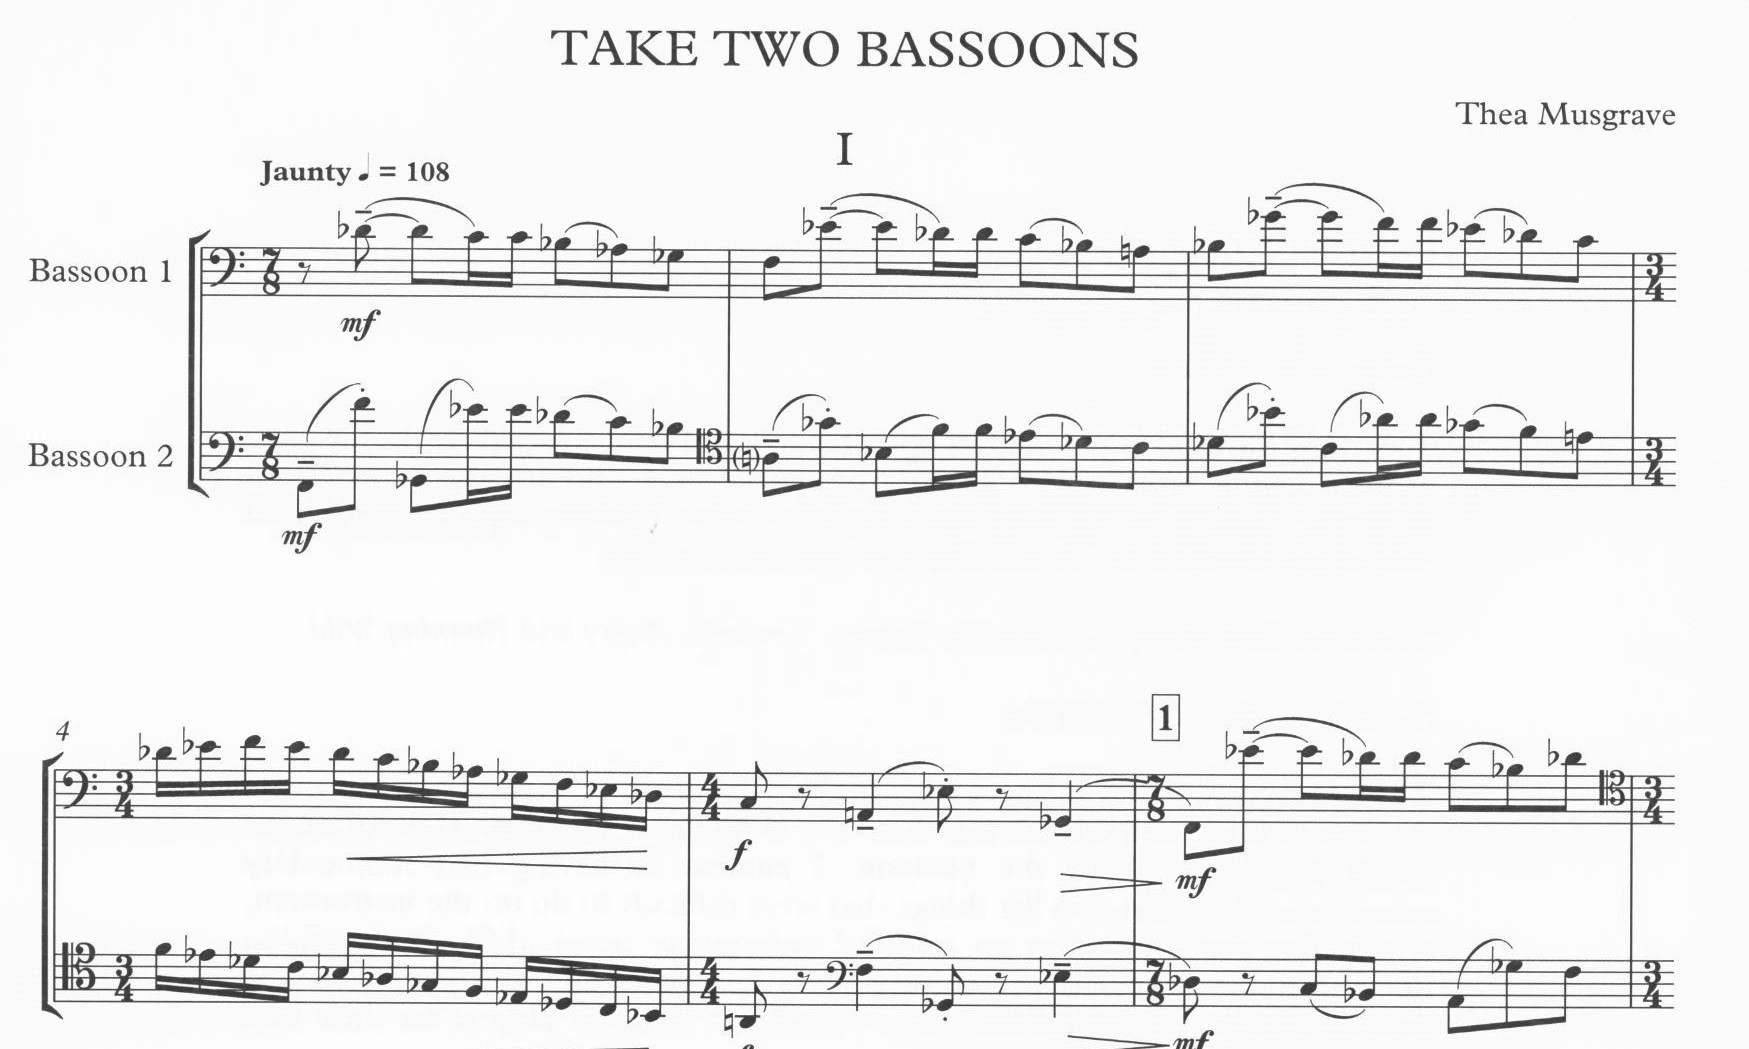 Take Two Bassoons - Thea Musgrave